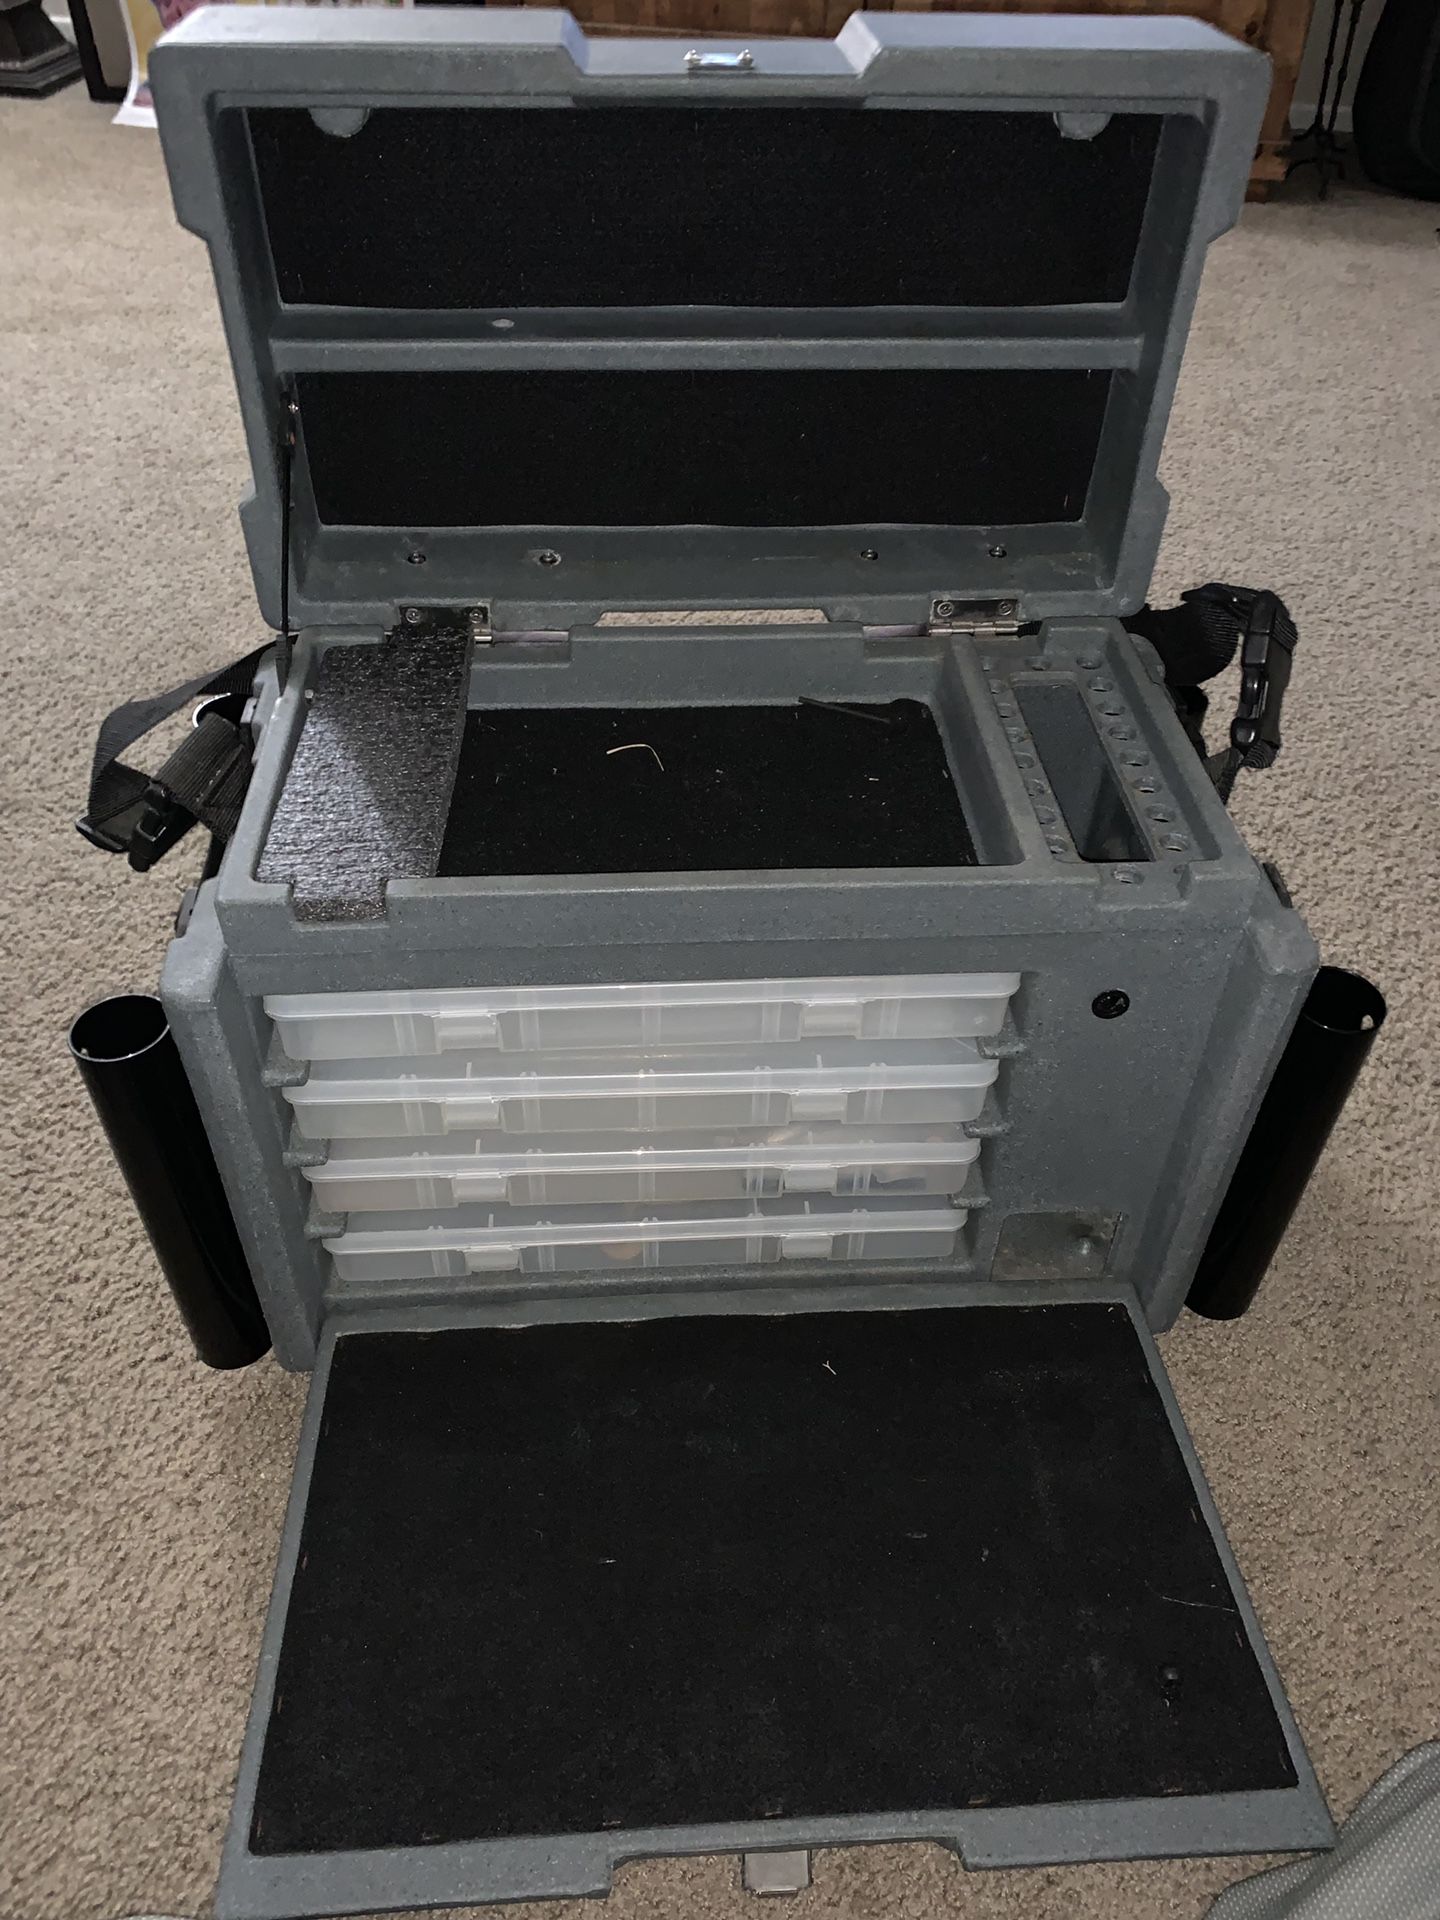 SKB Small Tackle Box 7100 fishing for Sale in Los Alamitos, CA